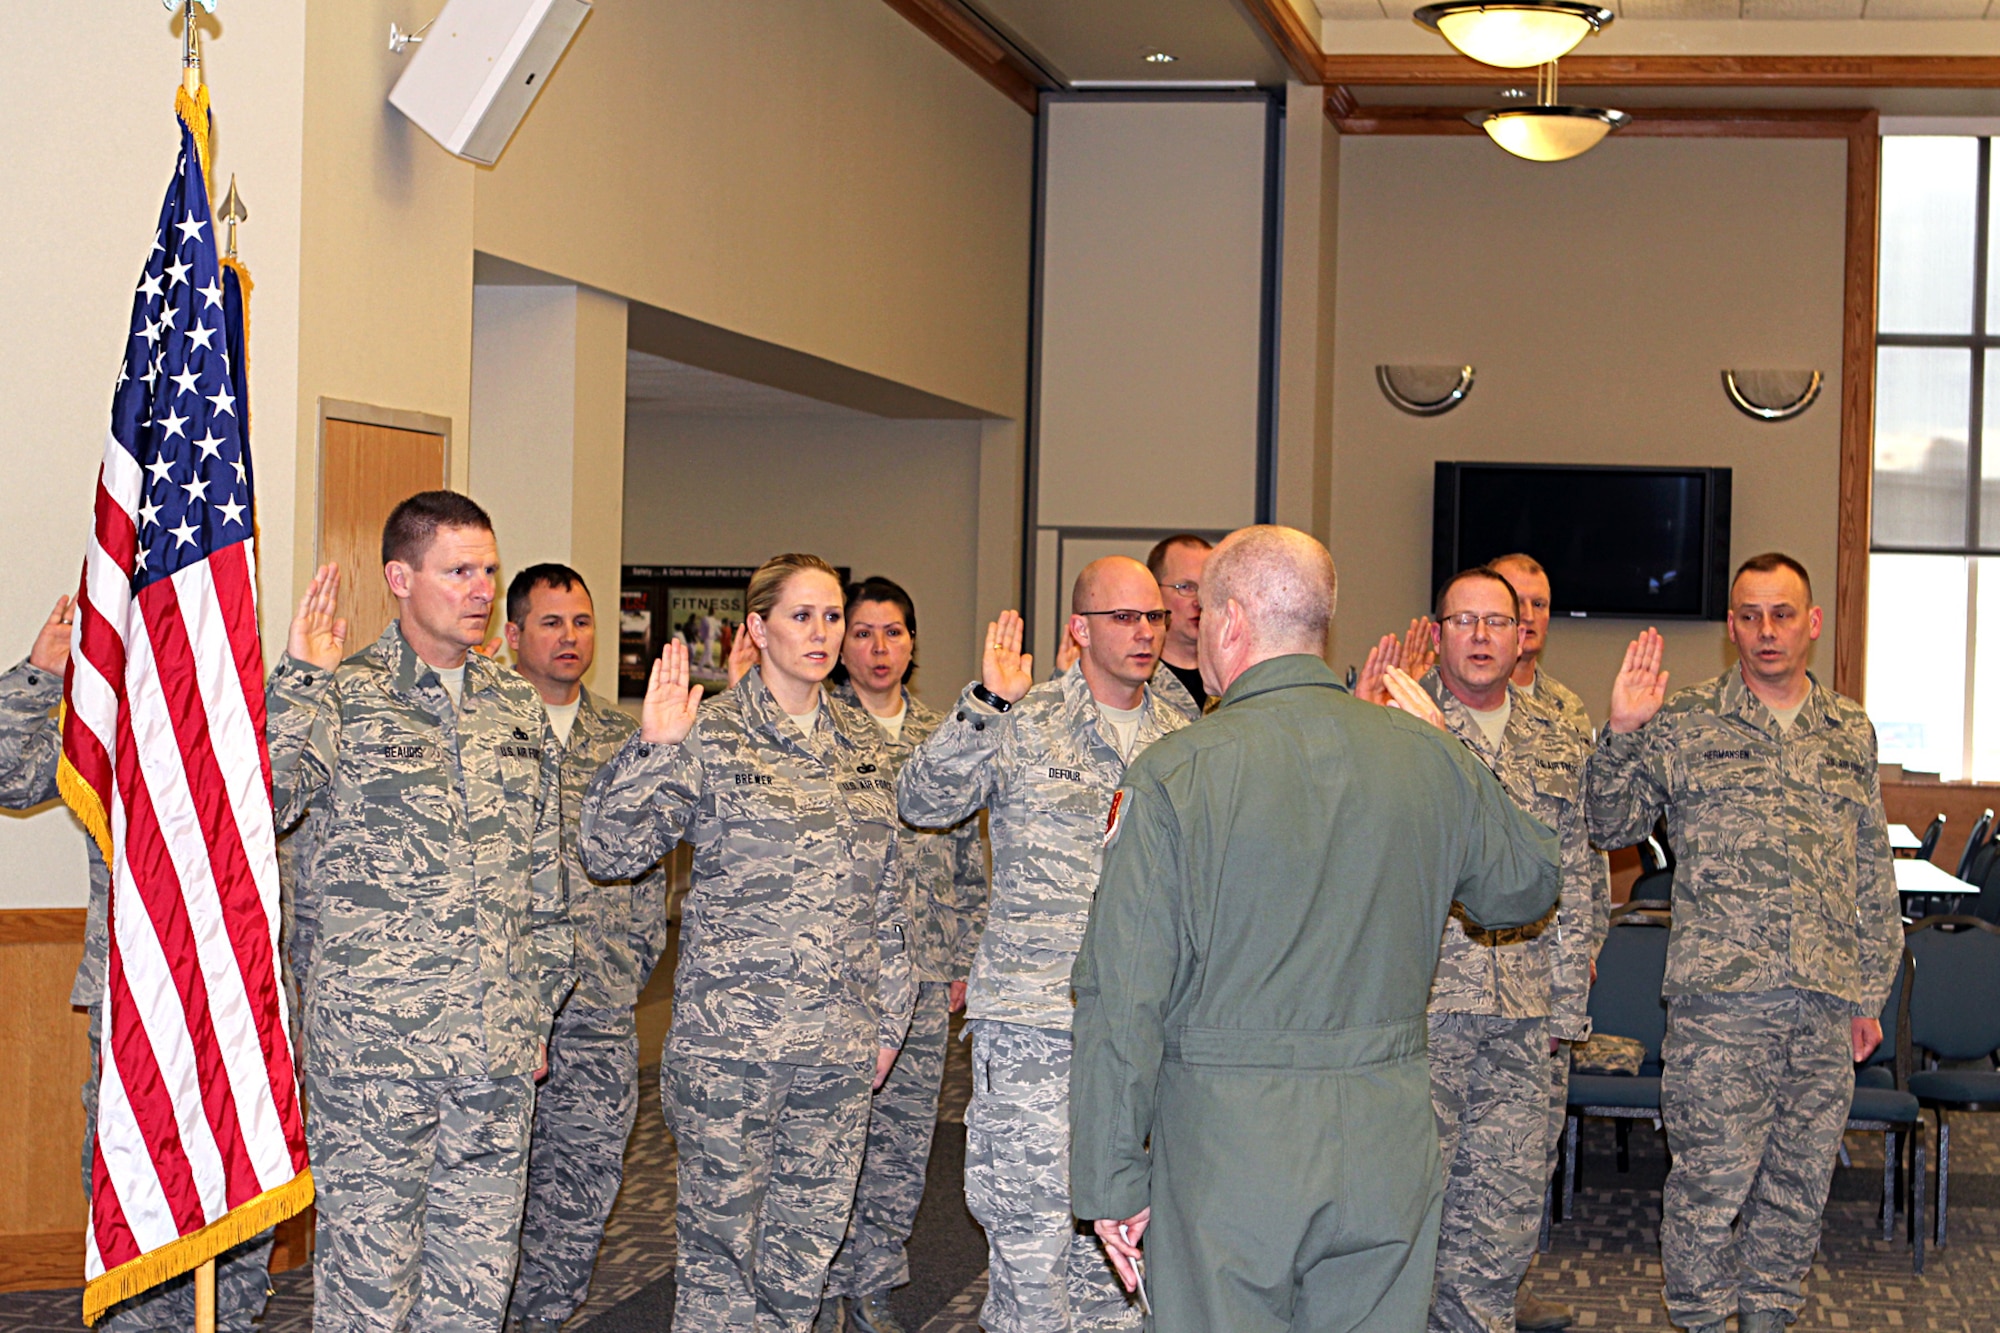 150411-Z-VA676-220 -- A group of Michigan Air National Guard Airmen take the oath of enlistment during a ceremony at Selfridge Air National Guard Base, Mich., April 11, 2015. Thirty Michigan ANG Airmen re-enlisted for three years or more during the first quarter of fiscal year 2015. Several dozen more have extended their existing enlistment or re-enlisted for shorter periods. Administering the oath is Brig. Gen. John D. Slocum, 127th Wing commander. (U.S. Air National Guard photo by Tech. Sgt. Dan Heaton)